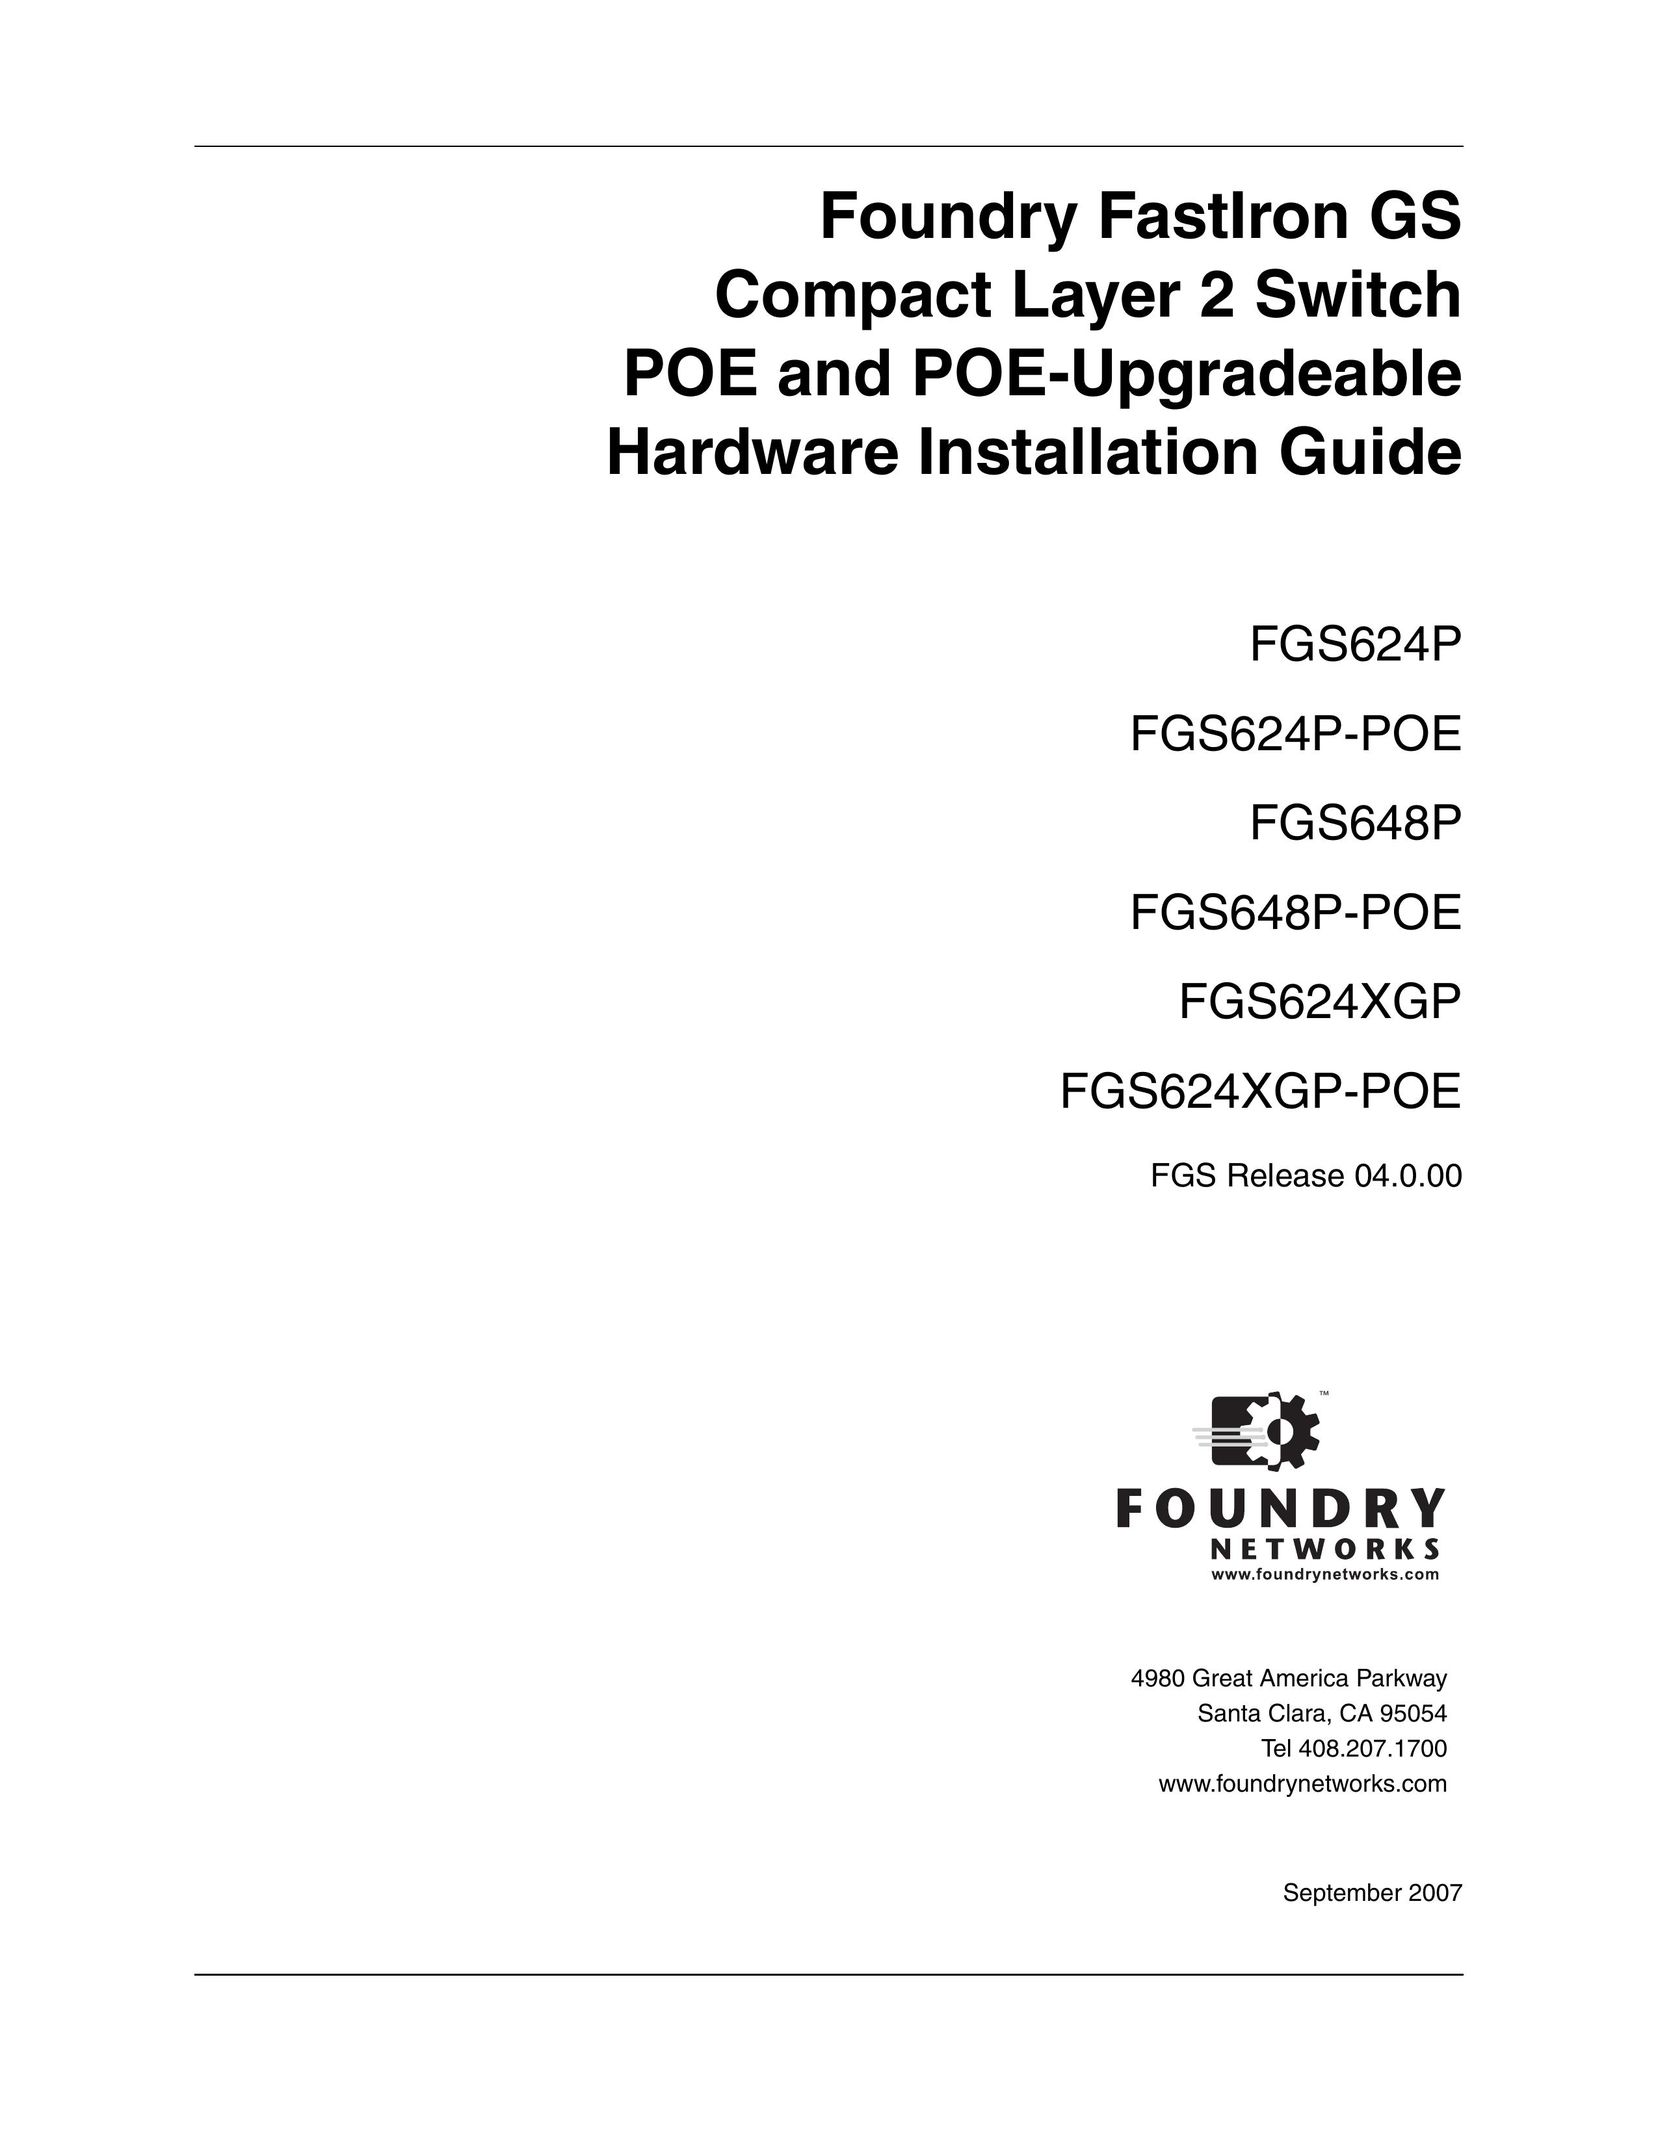 Foundry Networks FGS624XGP Network Hardware User Manual